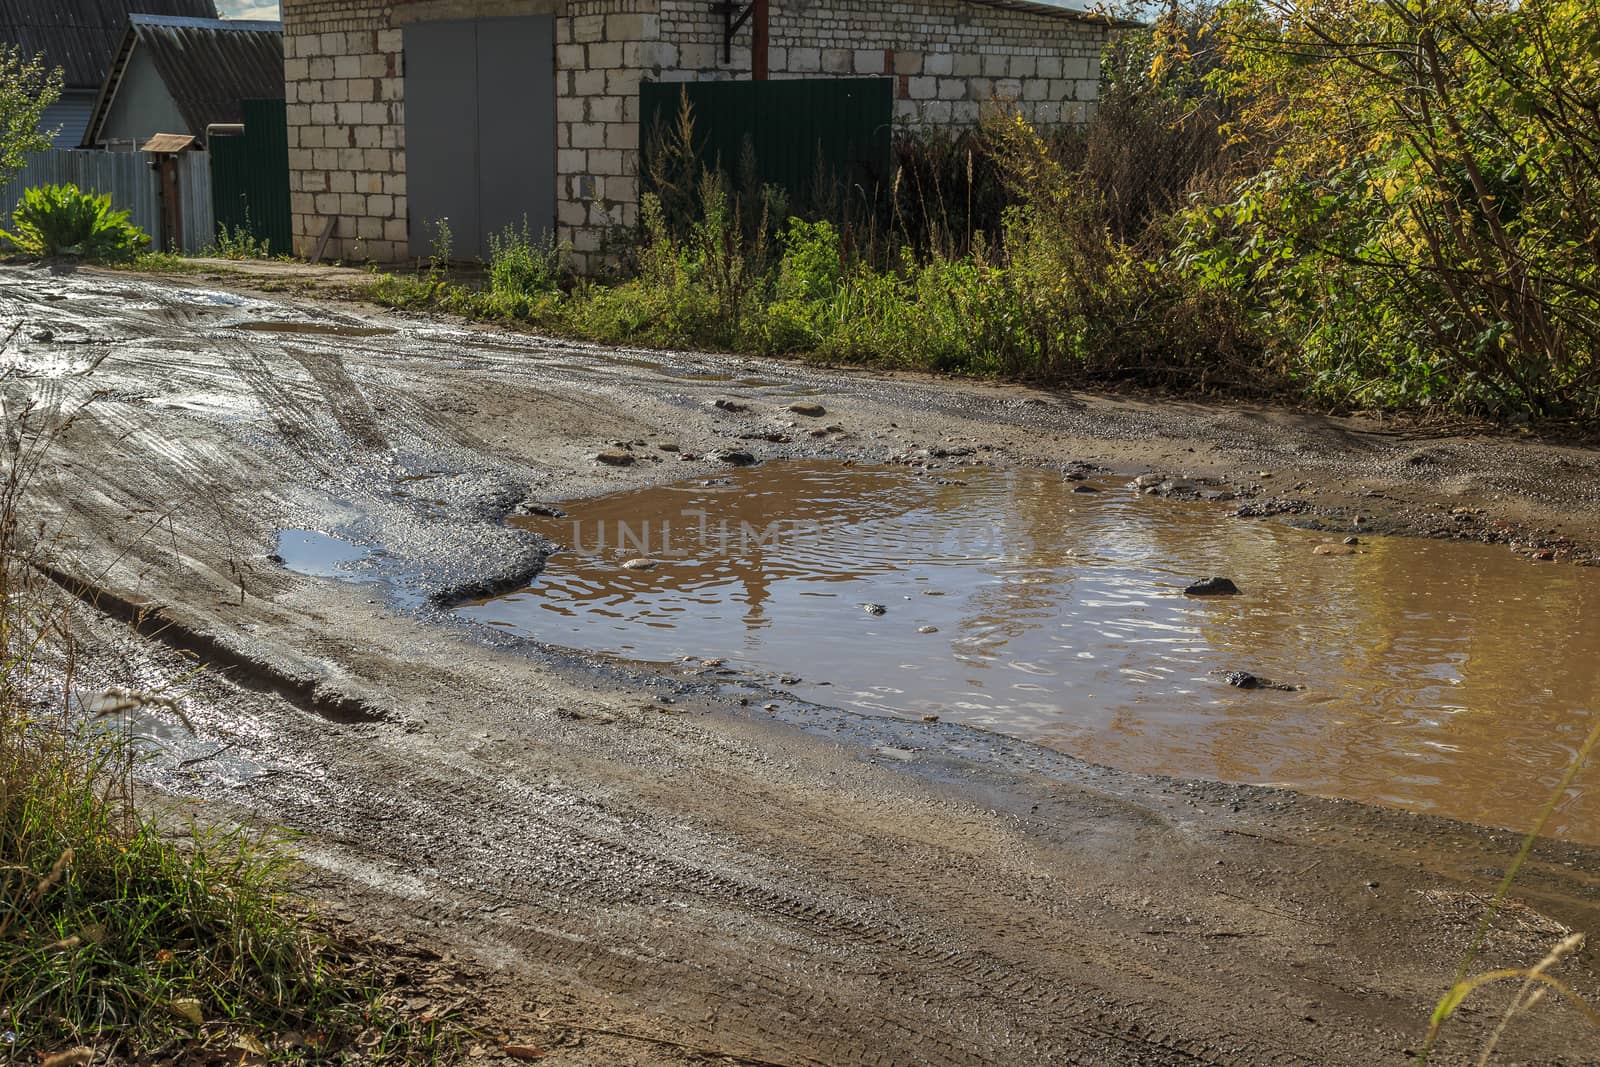 roadway in a provincial Russian city in poor condition by VADIM